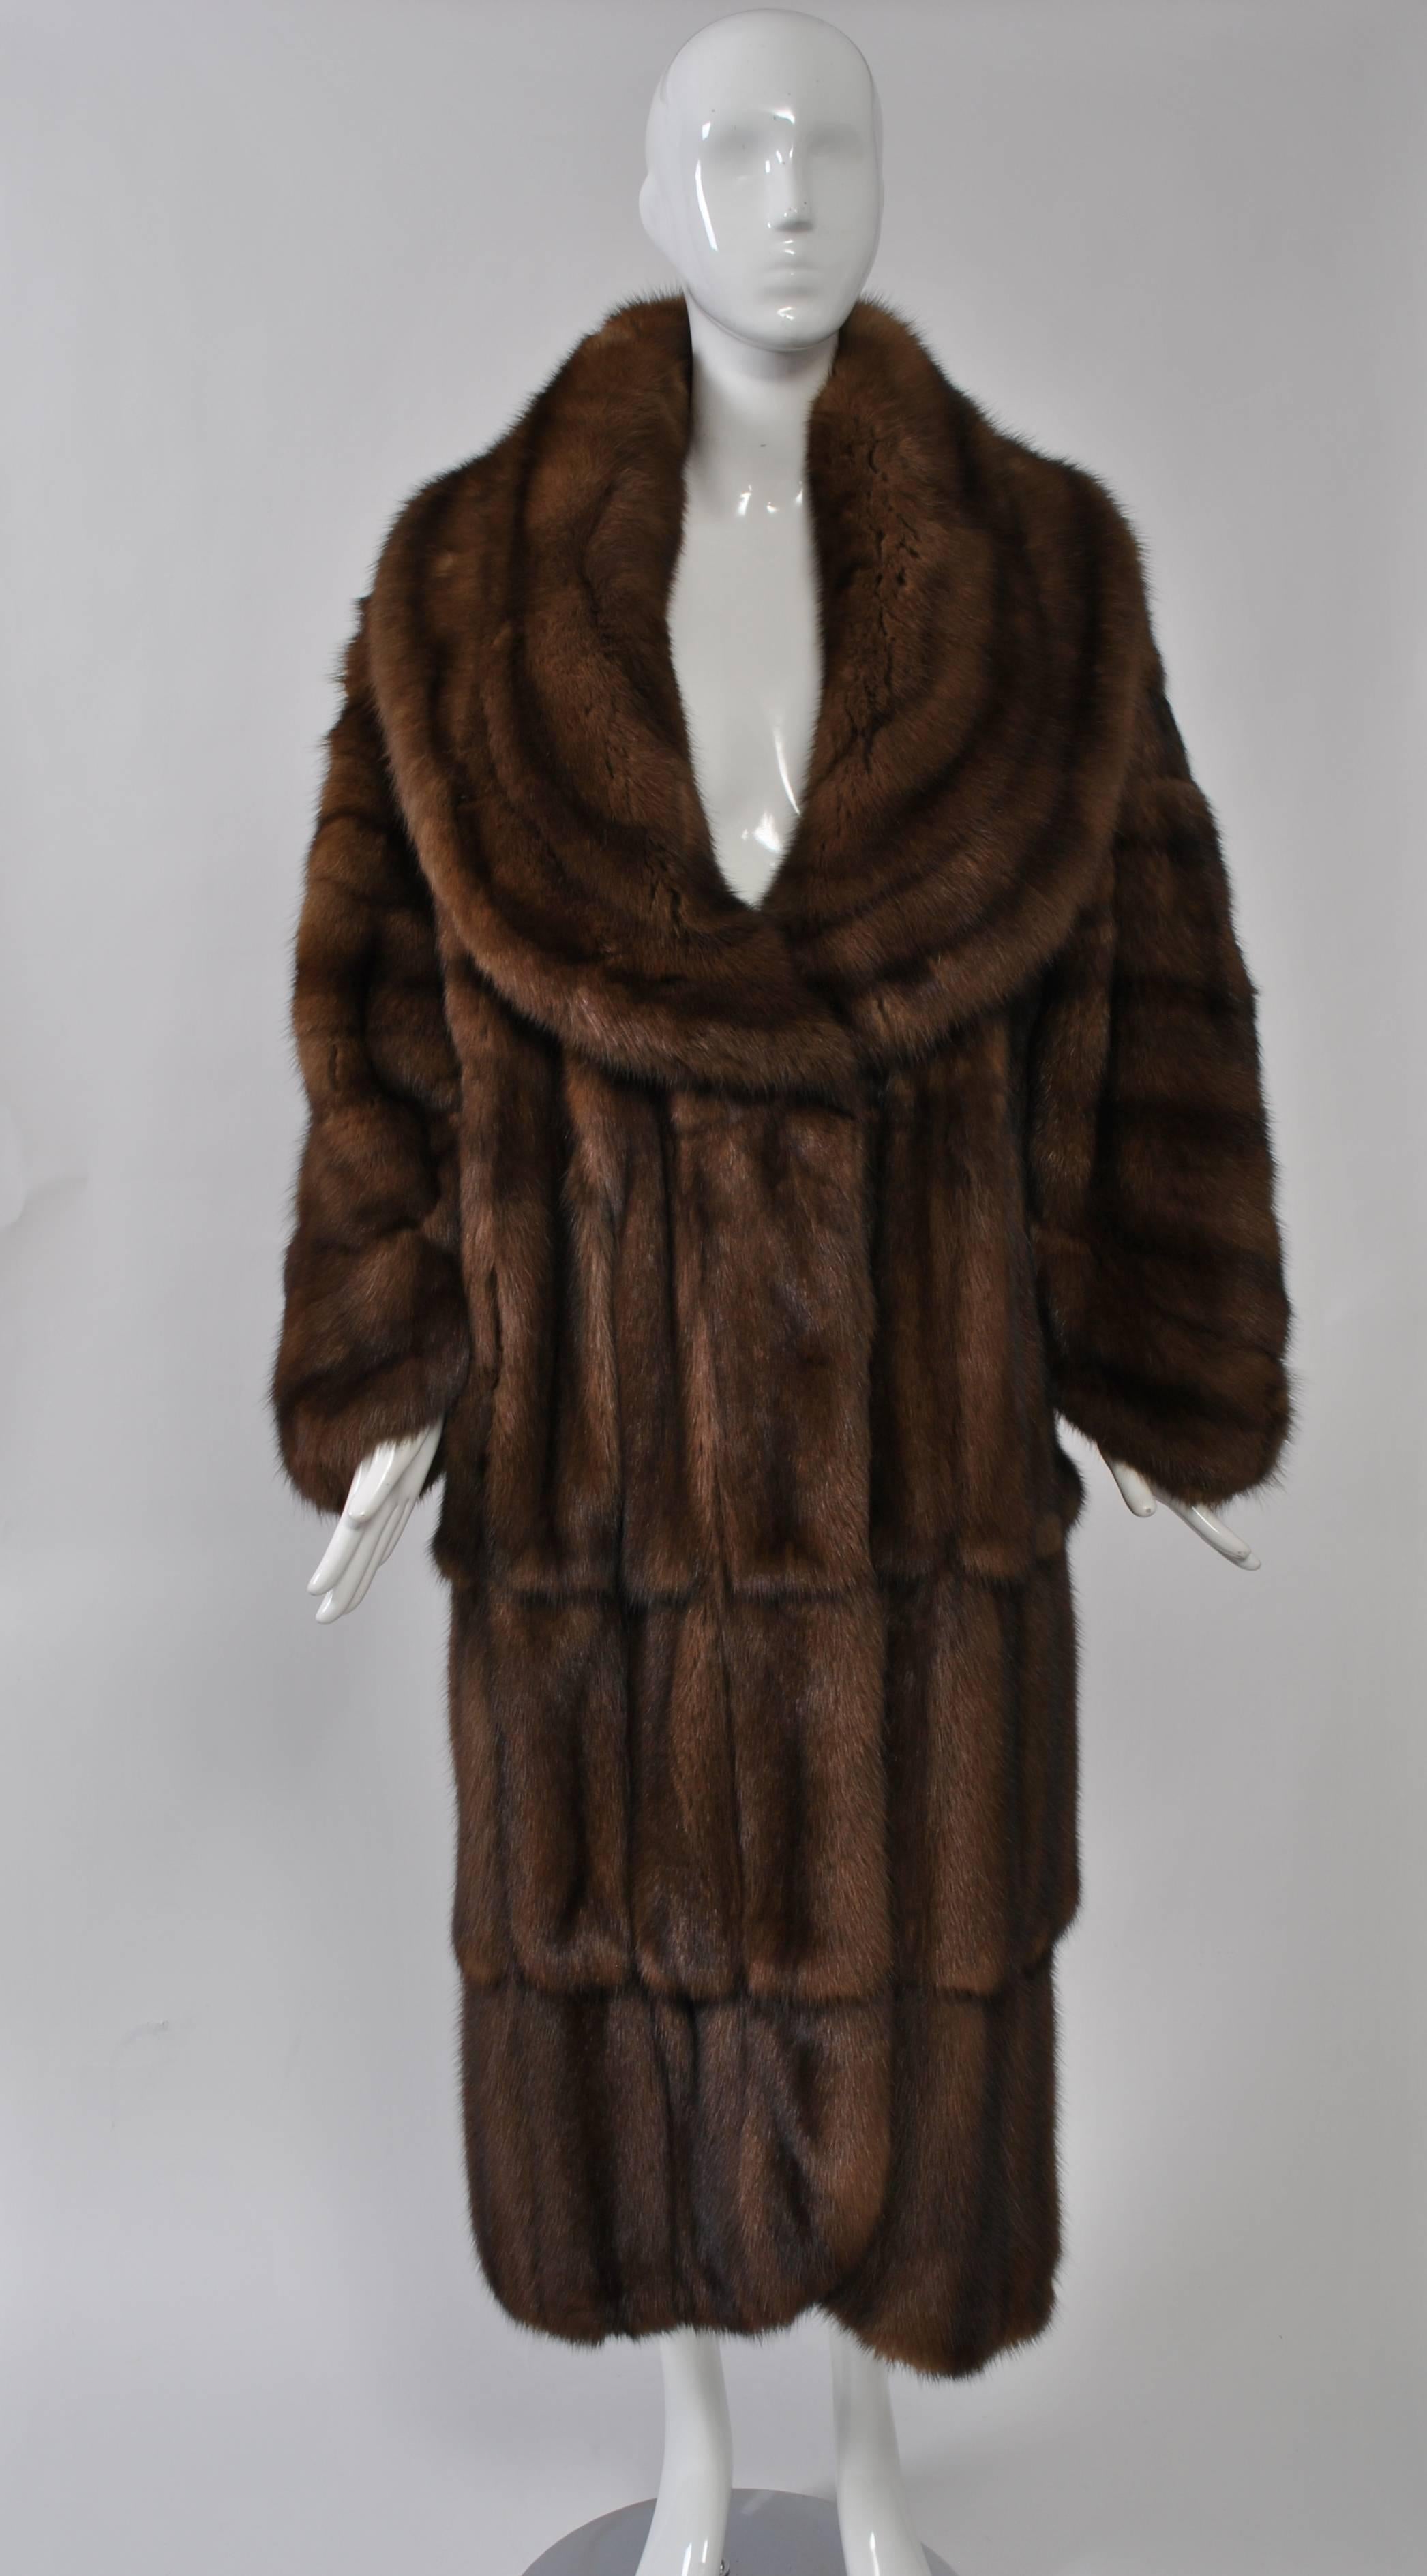 Luxurious, extravagant sable coat by the house of Fendi, whose fur production was overseen since the 1980s by Karl Lagerfeld. Oversized cut with low-cut, huge collar. Skins cut horizontally on top, vertically on bottom, curved front hem and wrists.